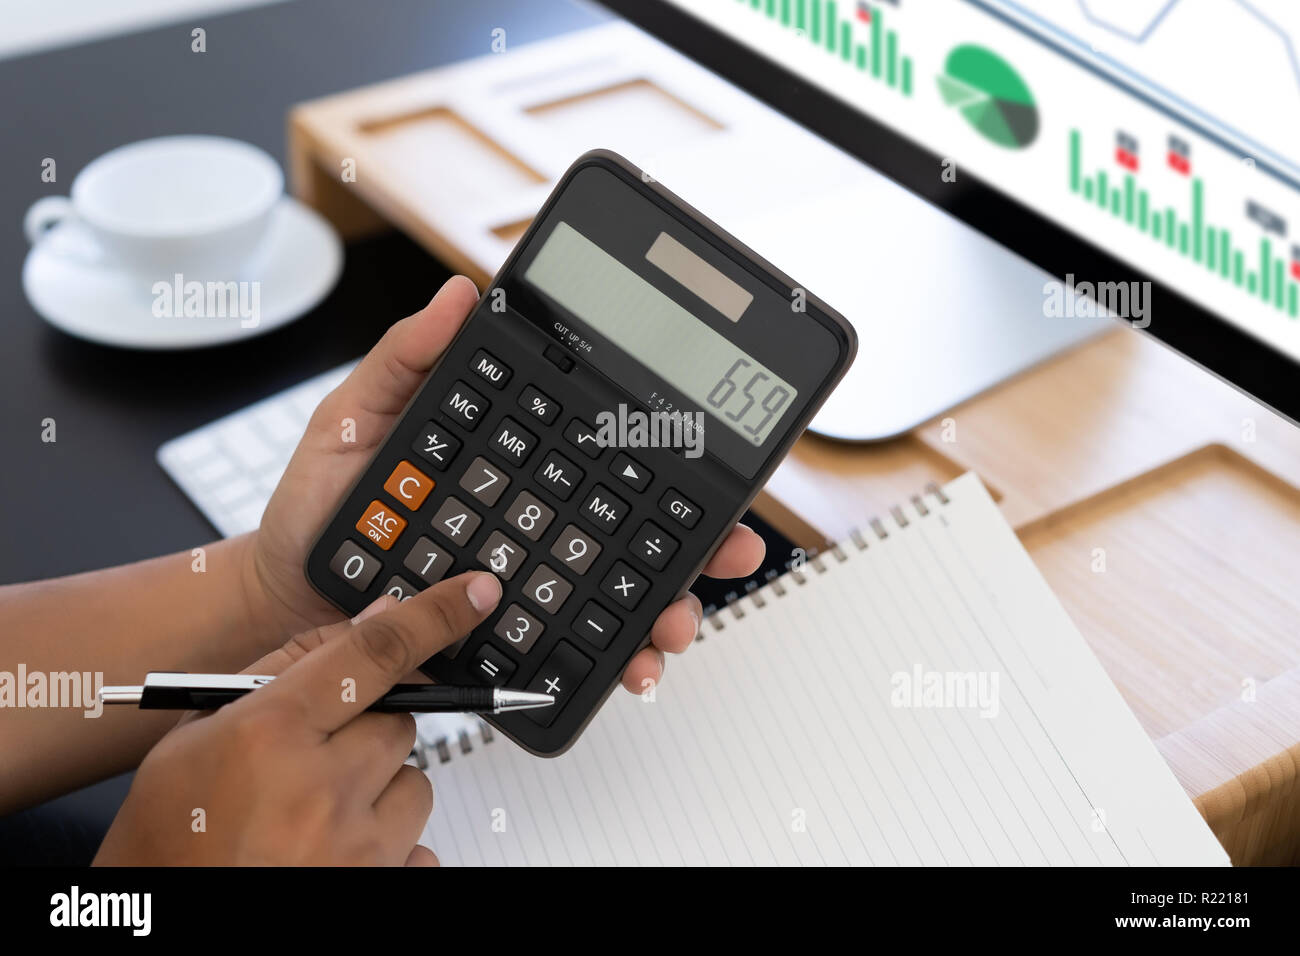 man use calculator make note with calculate about cost in office Close up  Stock Photo - Alamy